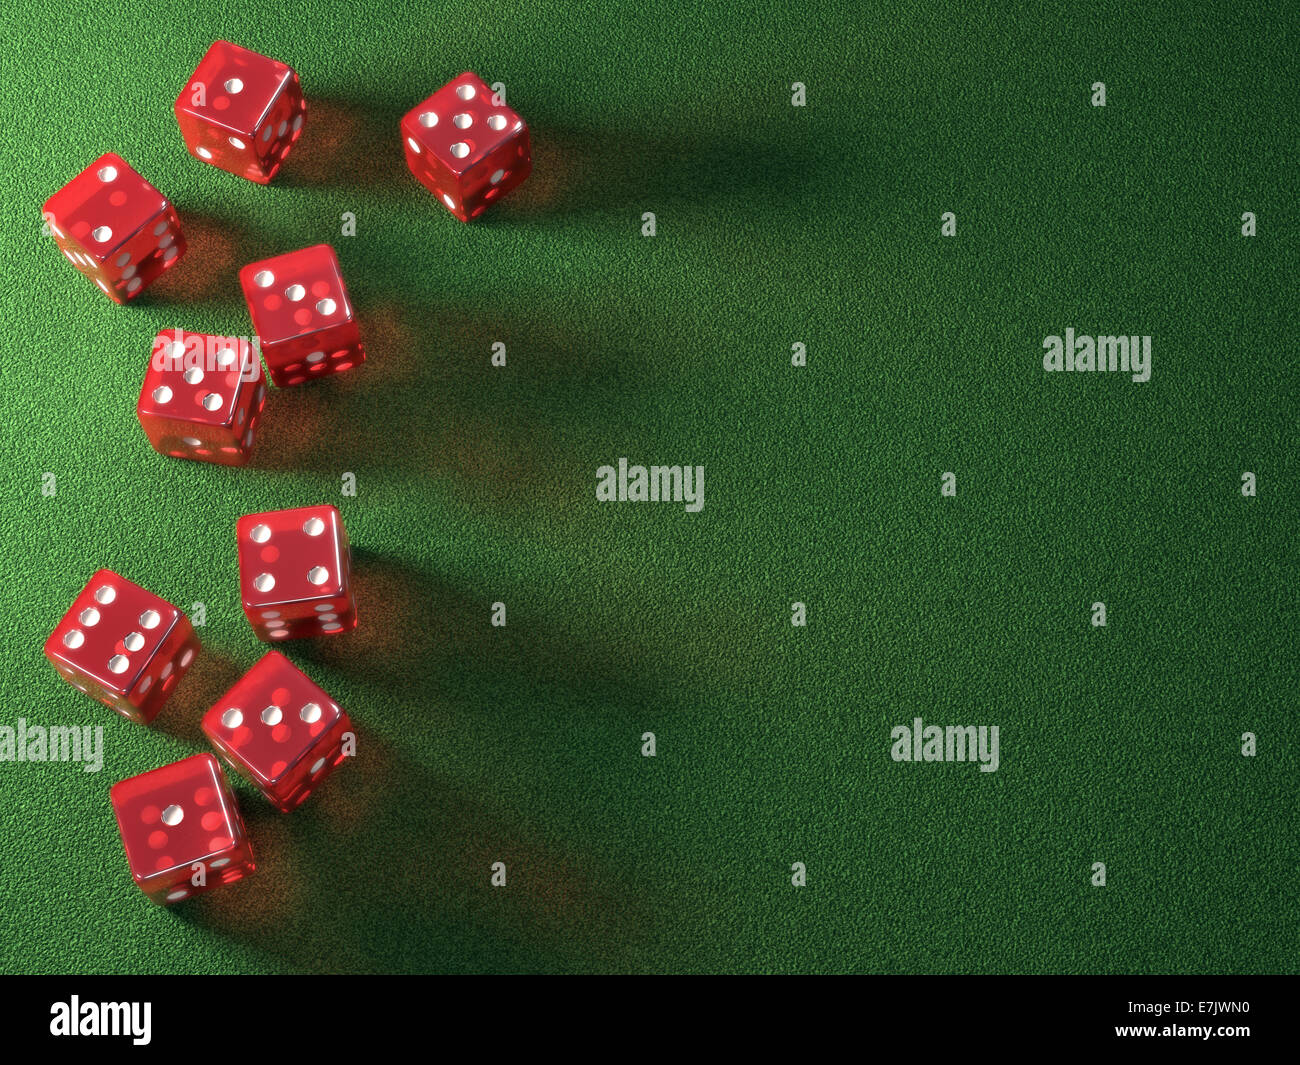 Red dice on green table. Your text on the empty space. Clipping path included. Stock Photo